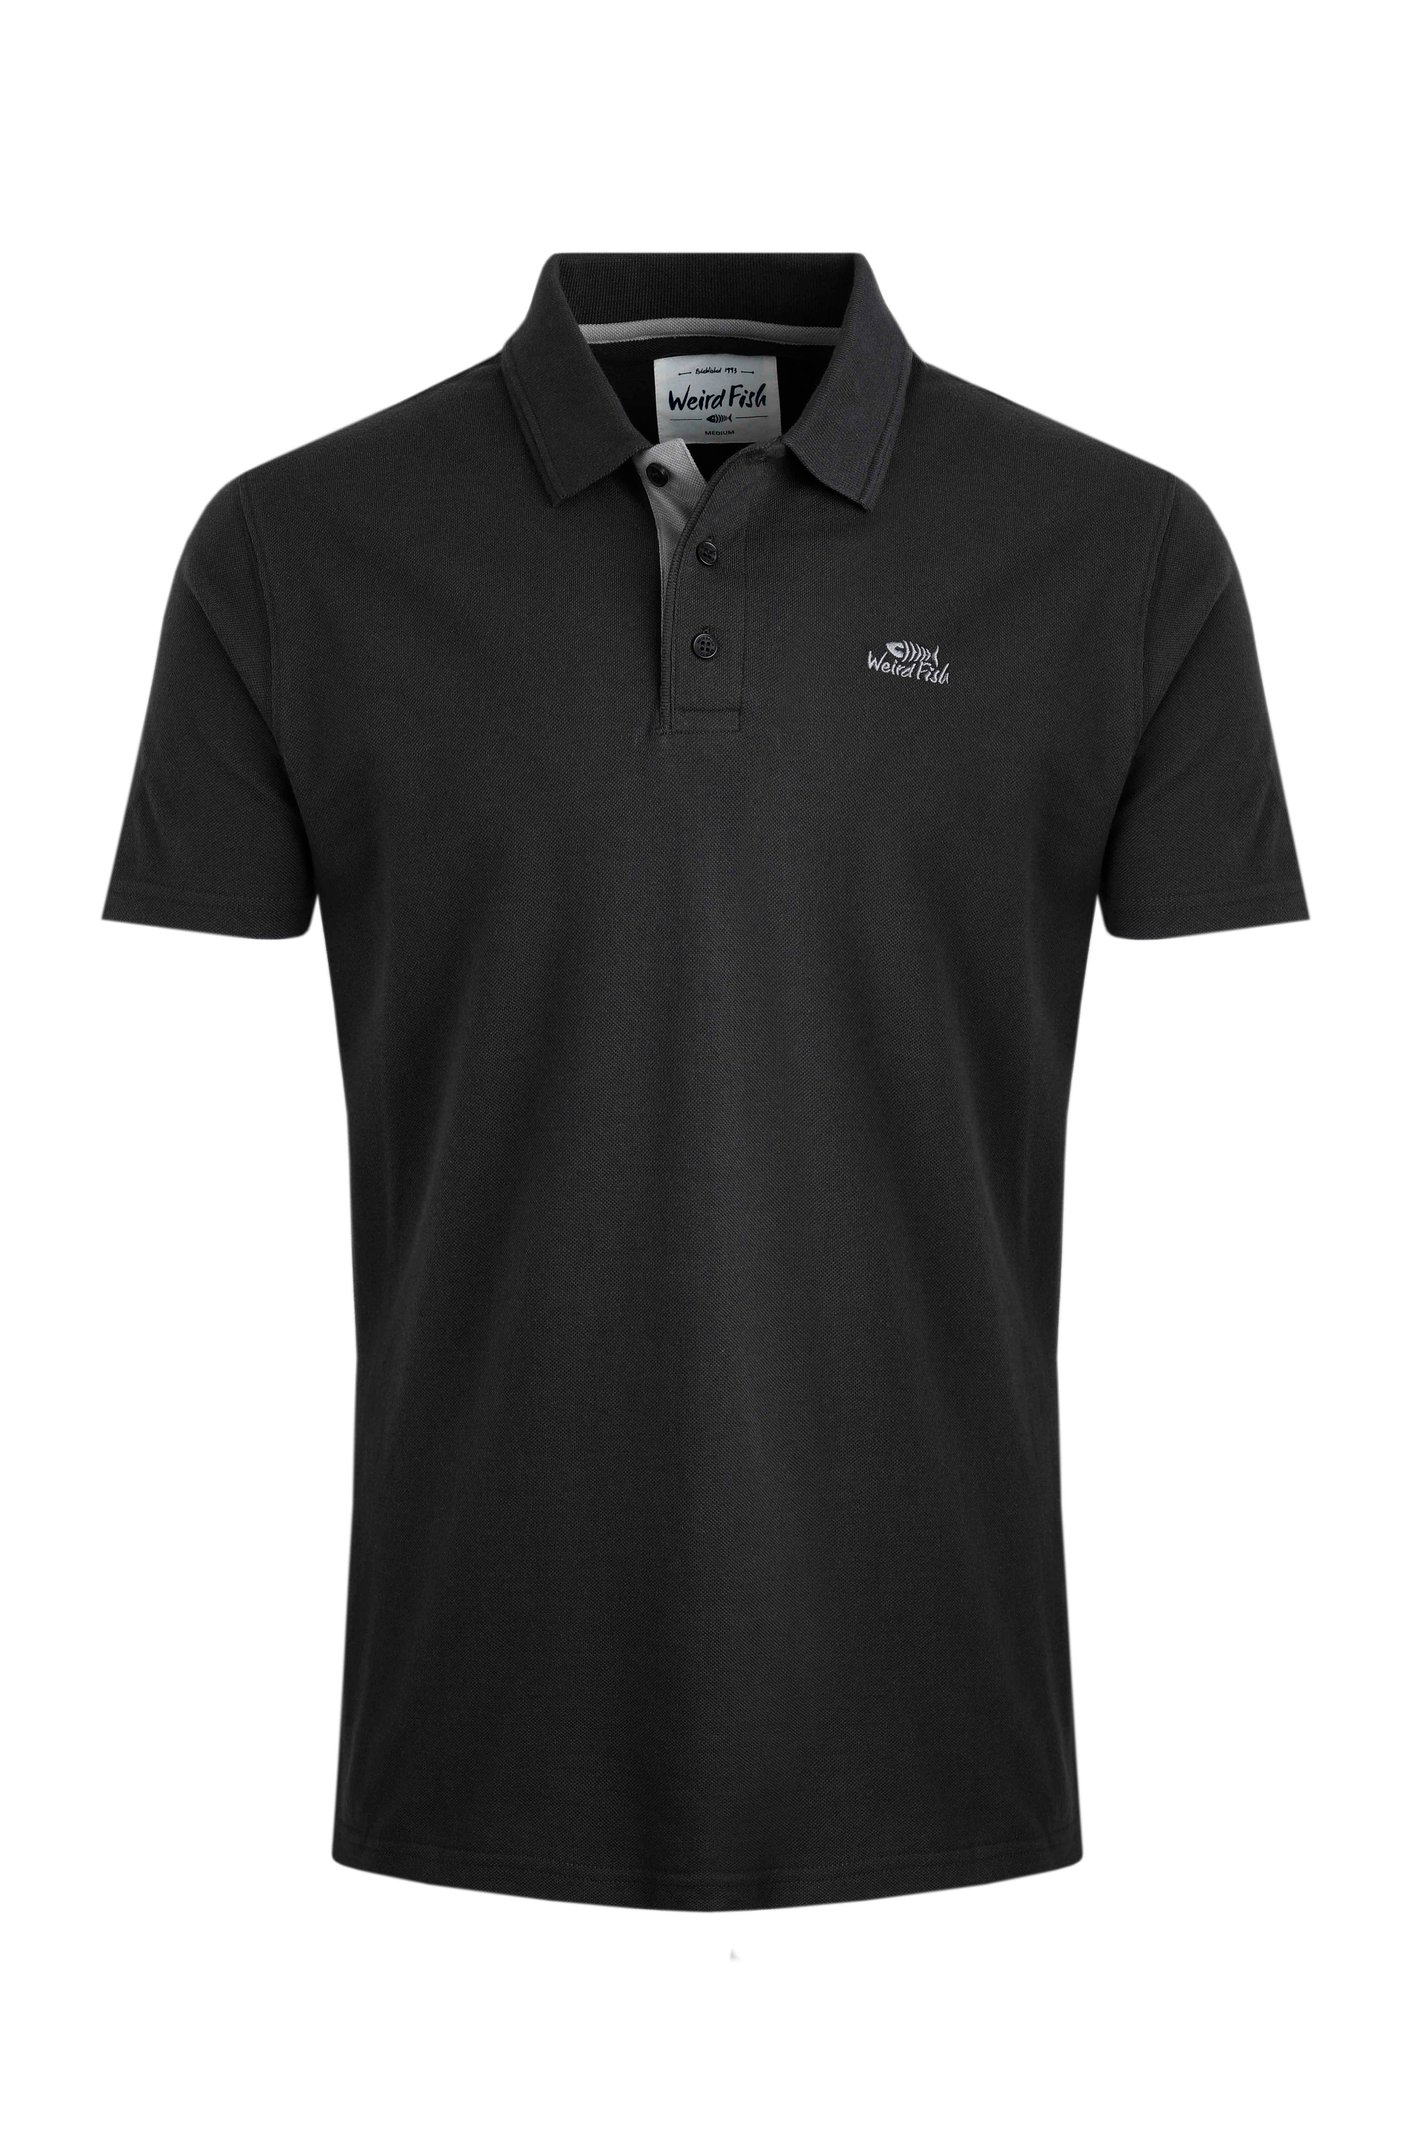 Weird Fish Miles Organic Pique Polo Washed Black Size XL